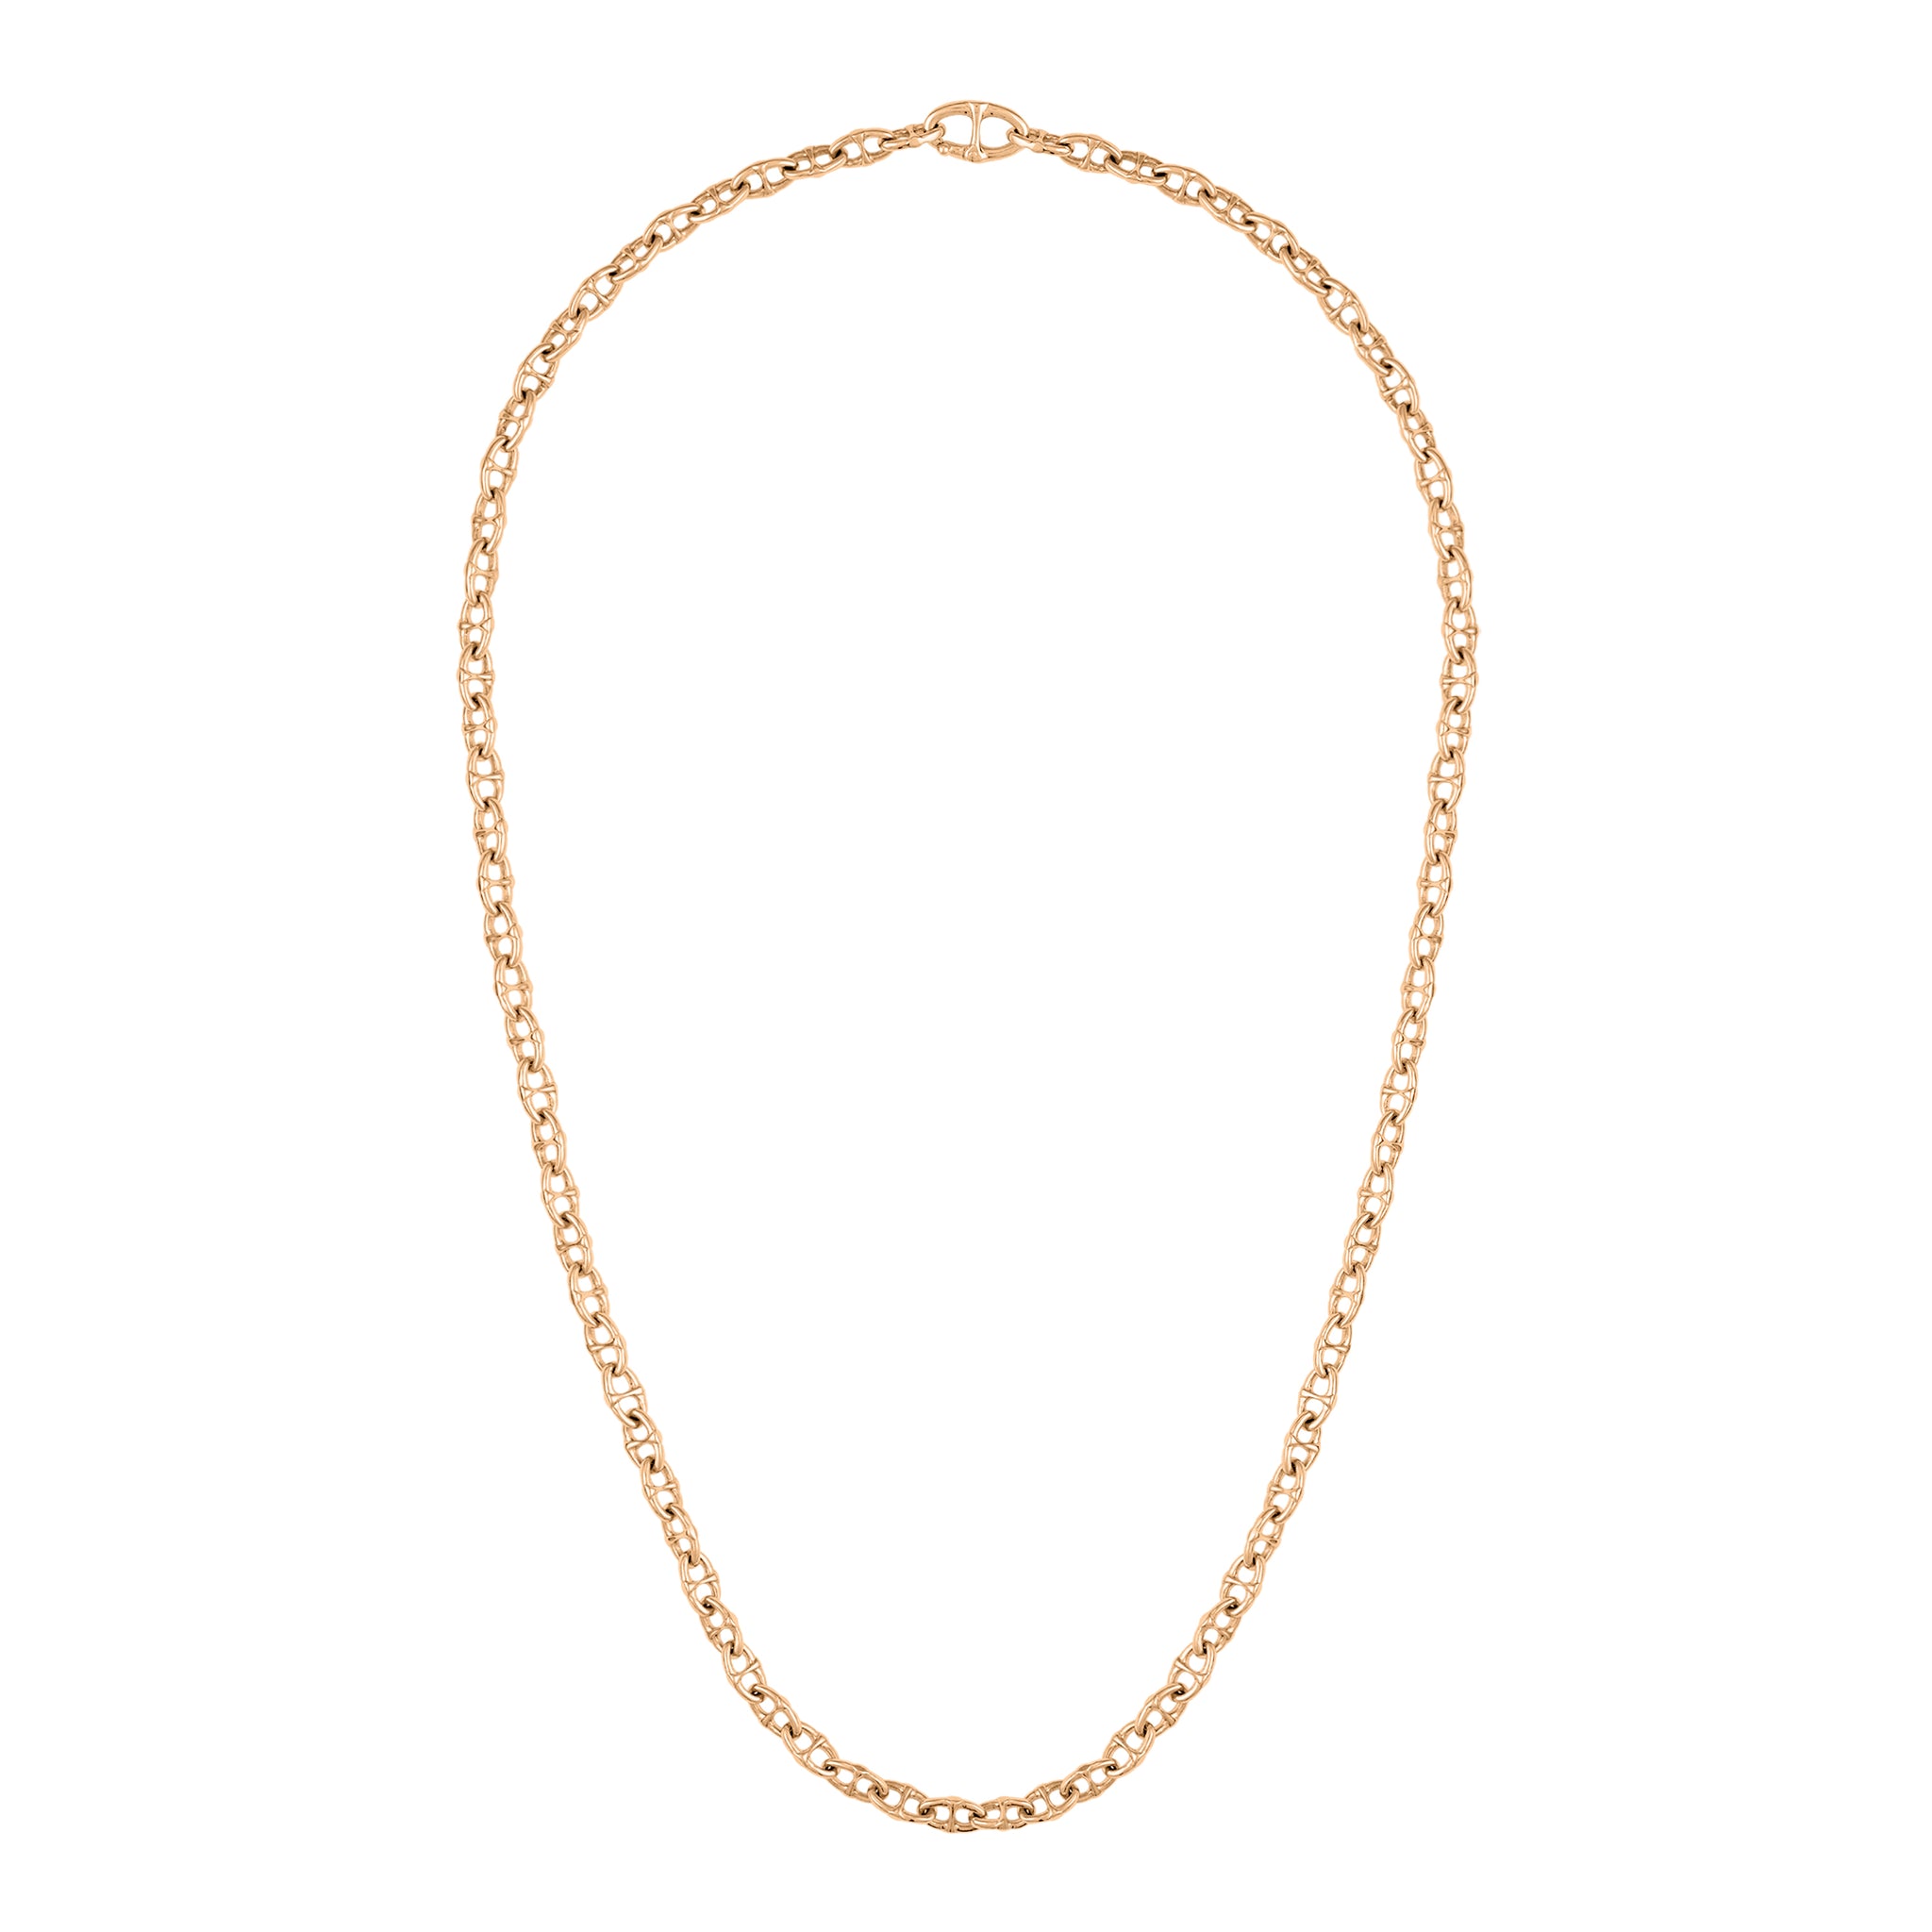 The Small Mariner Link Necklace